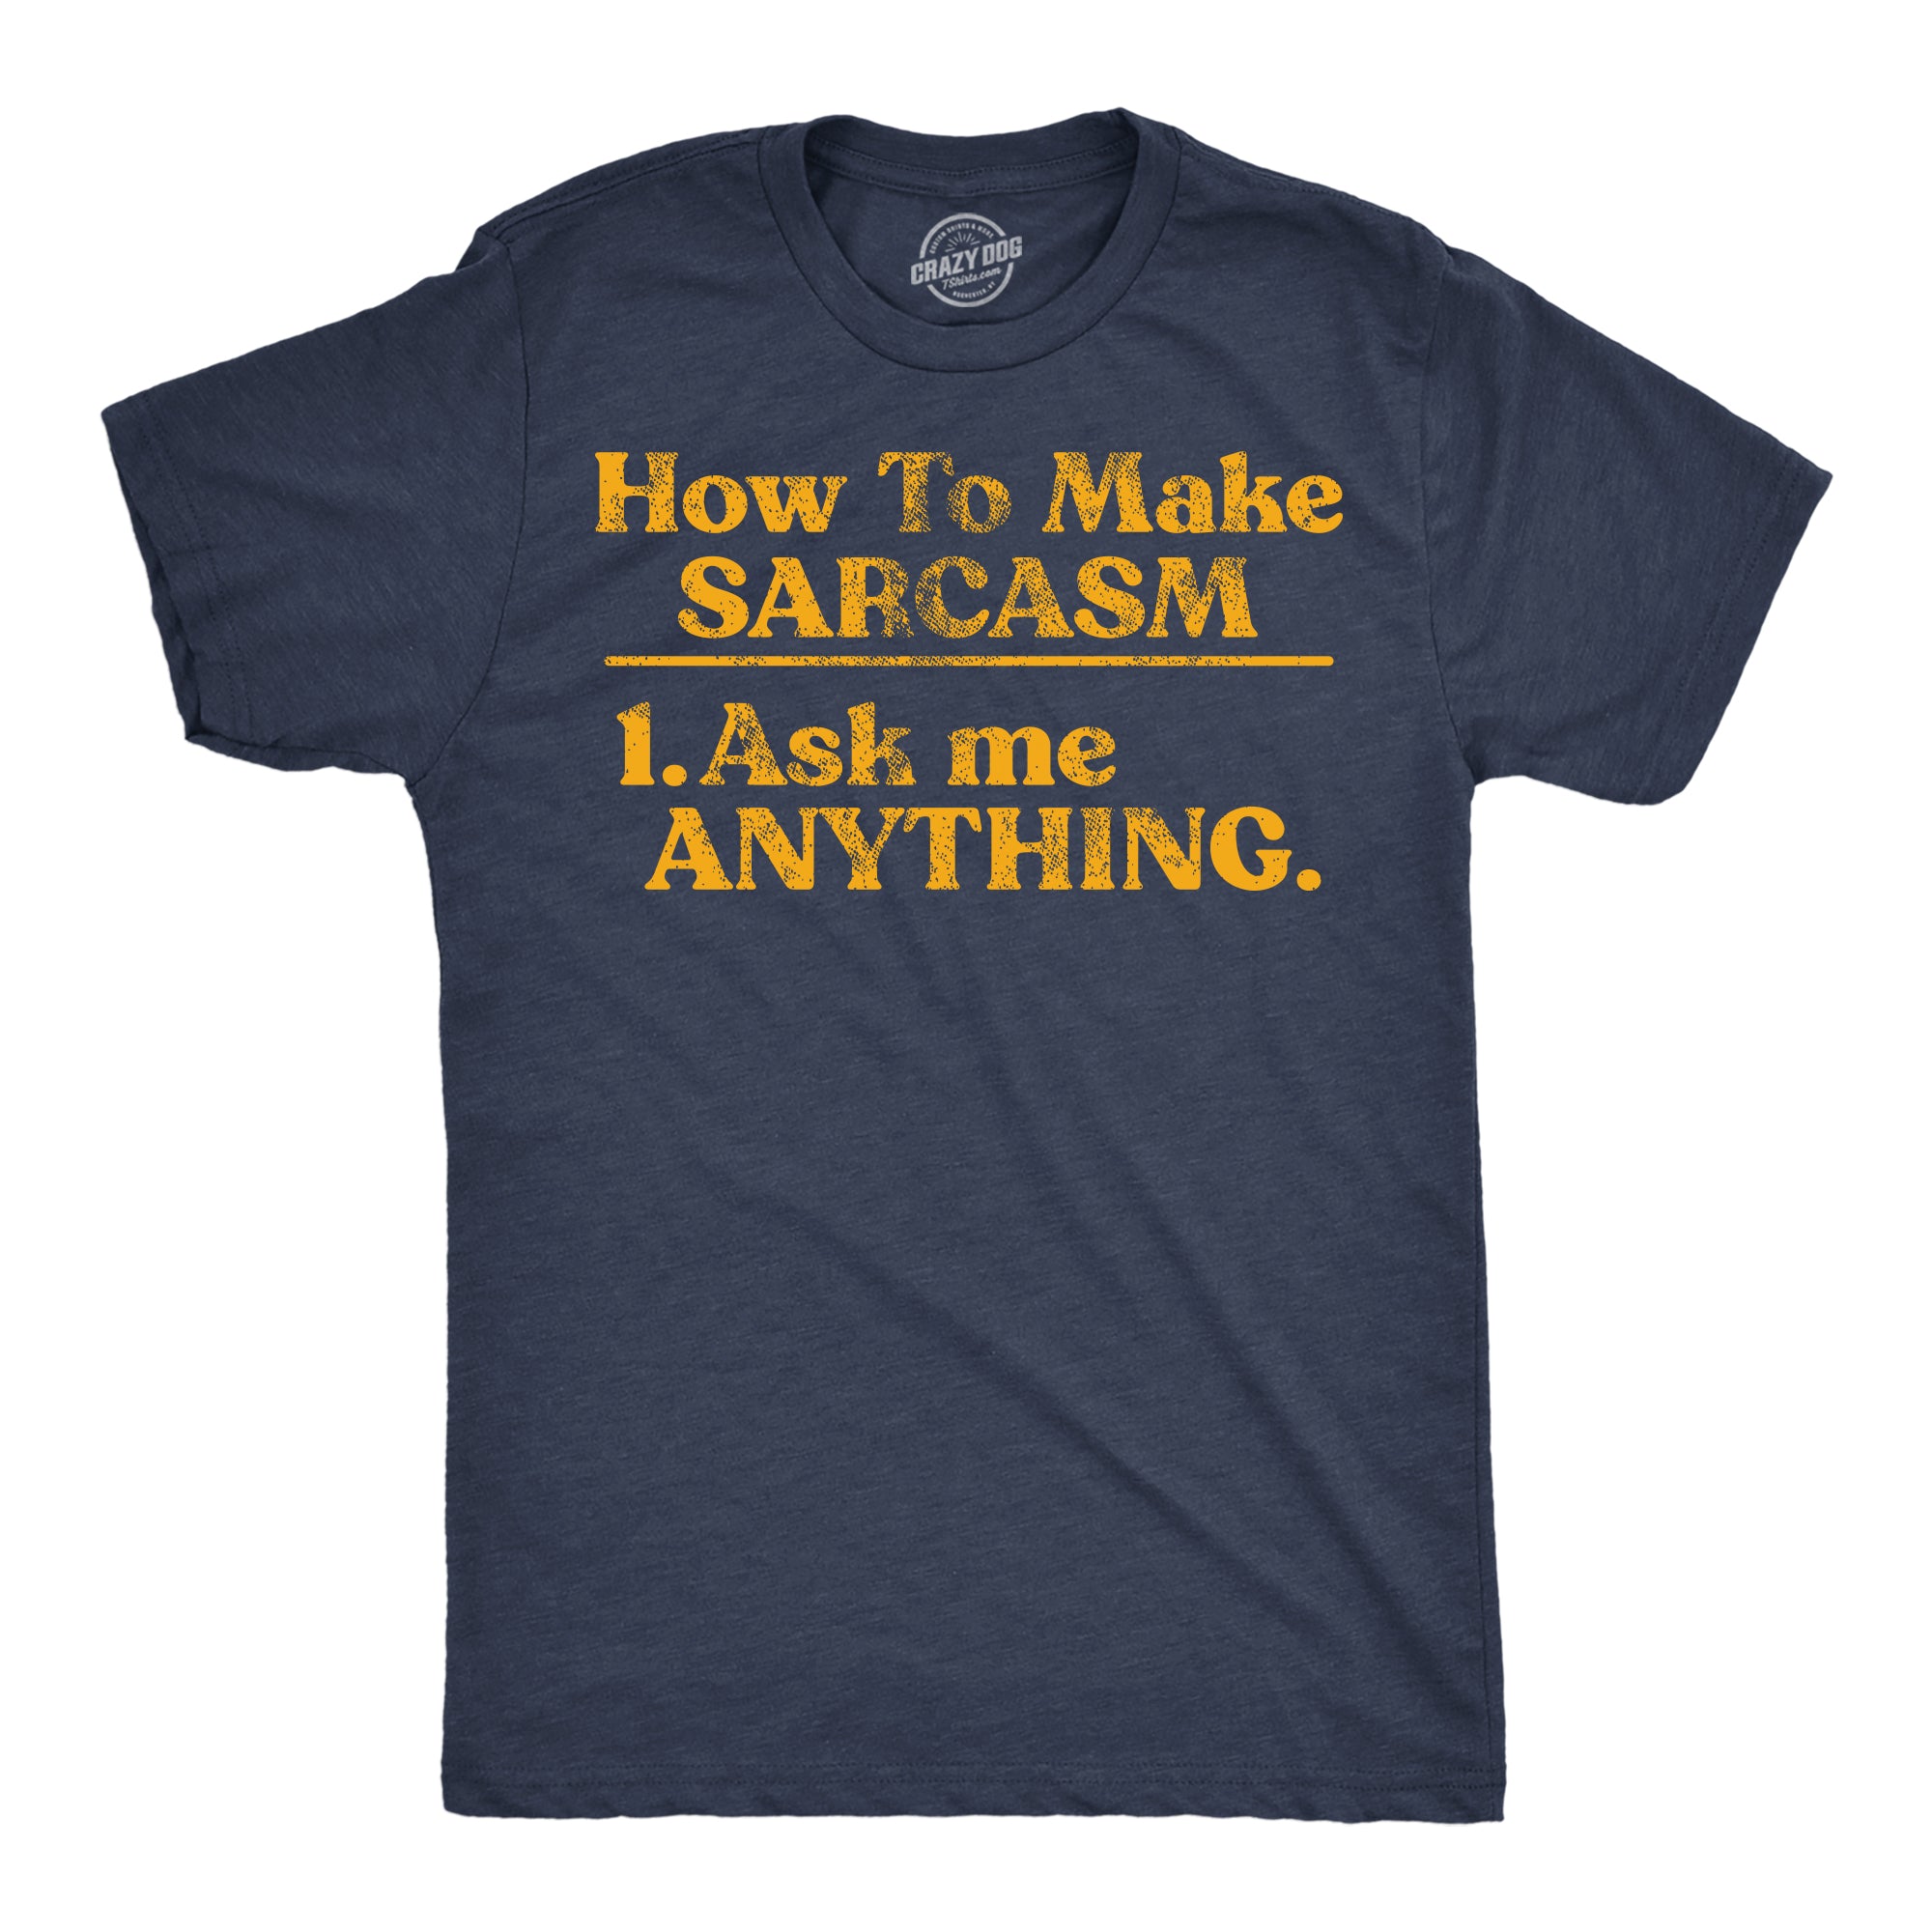 Funny Heather Navy - How To Make Sarcasm How To Make Sarcasm Ask Me Anything Mens T Shirt Nerdy sarcastic Tee